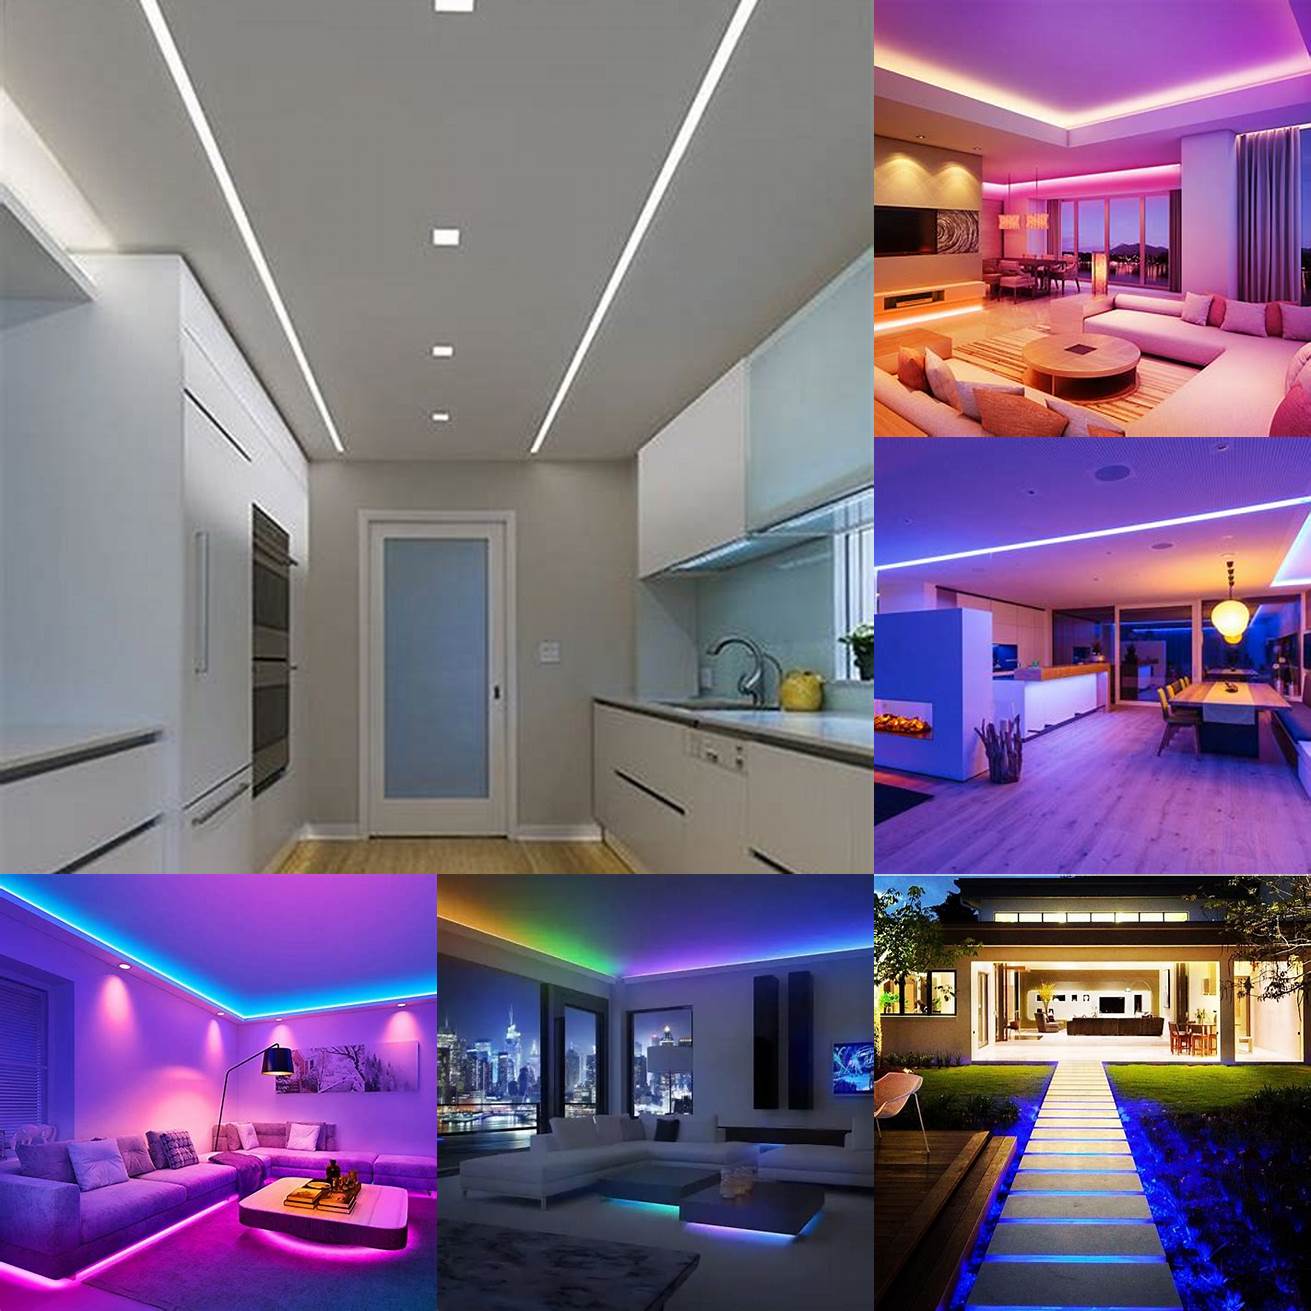 LED strip lights for a modern touch